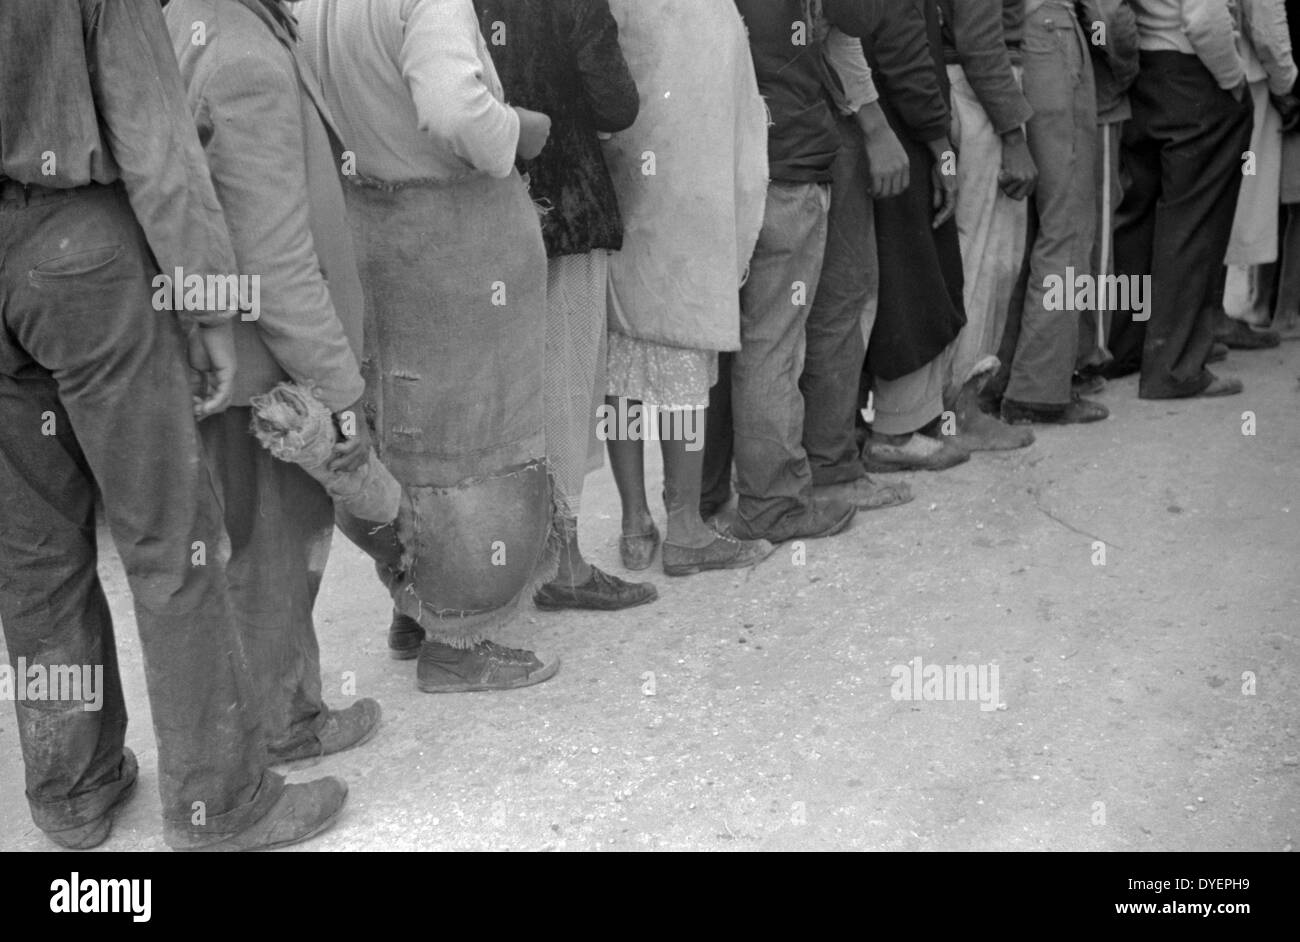 Vegetable workers, migrants, waiting after work to be paid. Near Homestead, Florida dated 19380101 Stock Photo